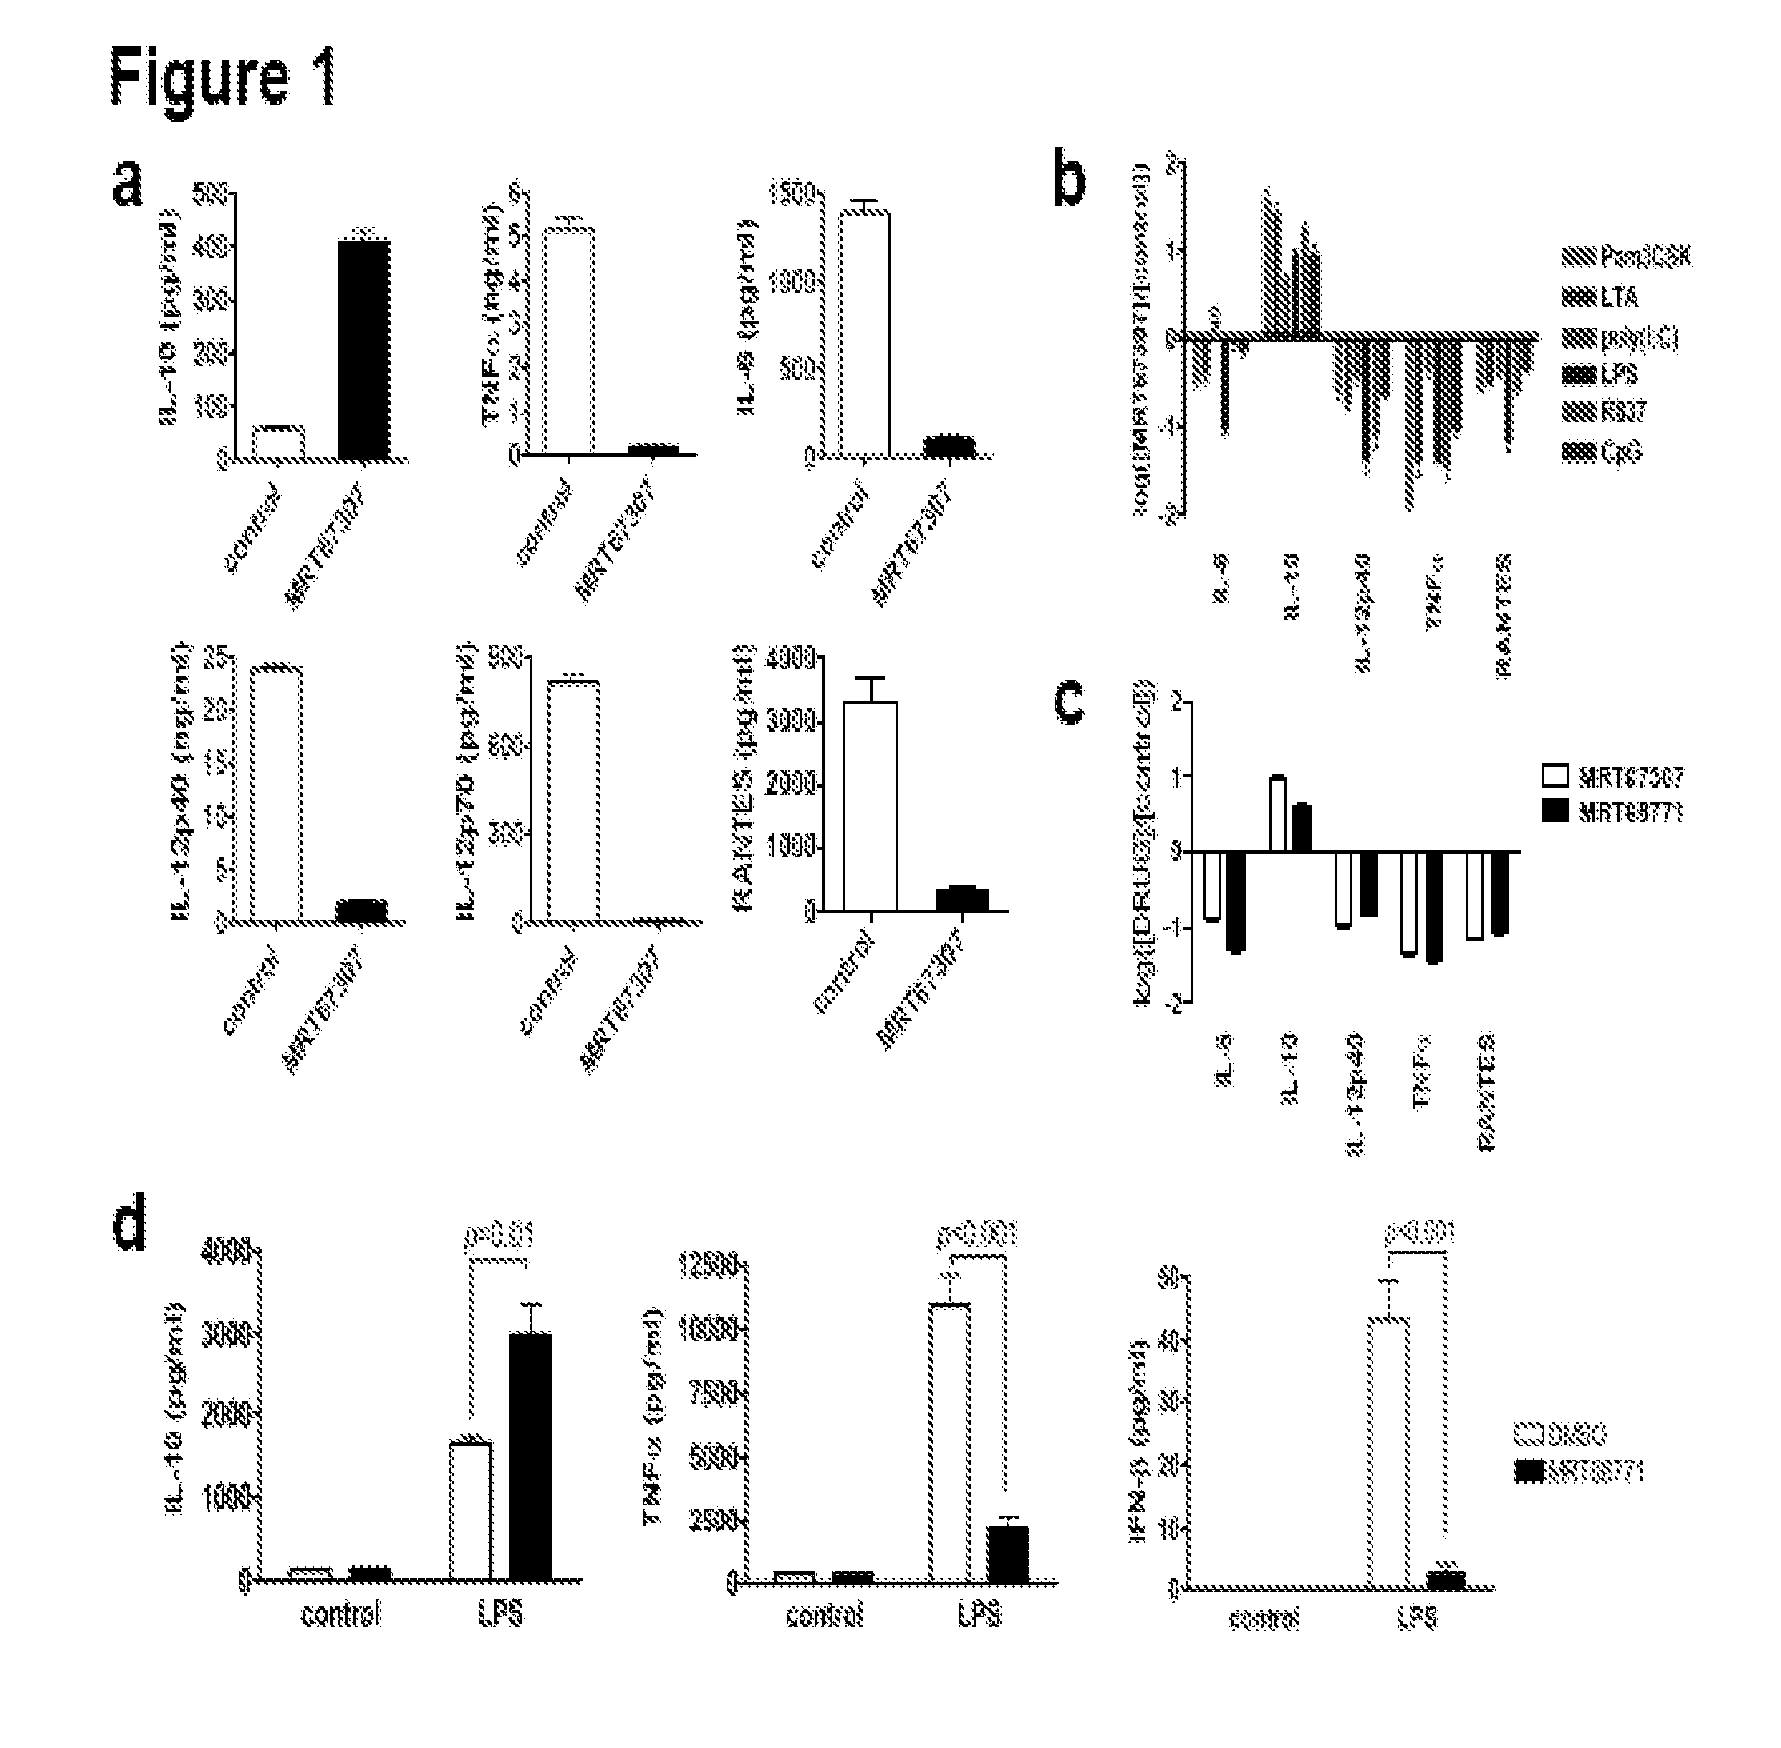 Sik inhibitor for use in a method of treating an inflammatory and/or immune disorder